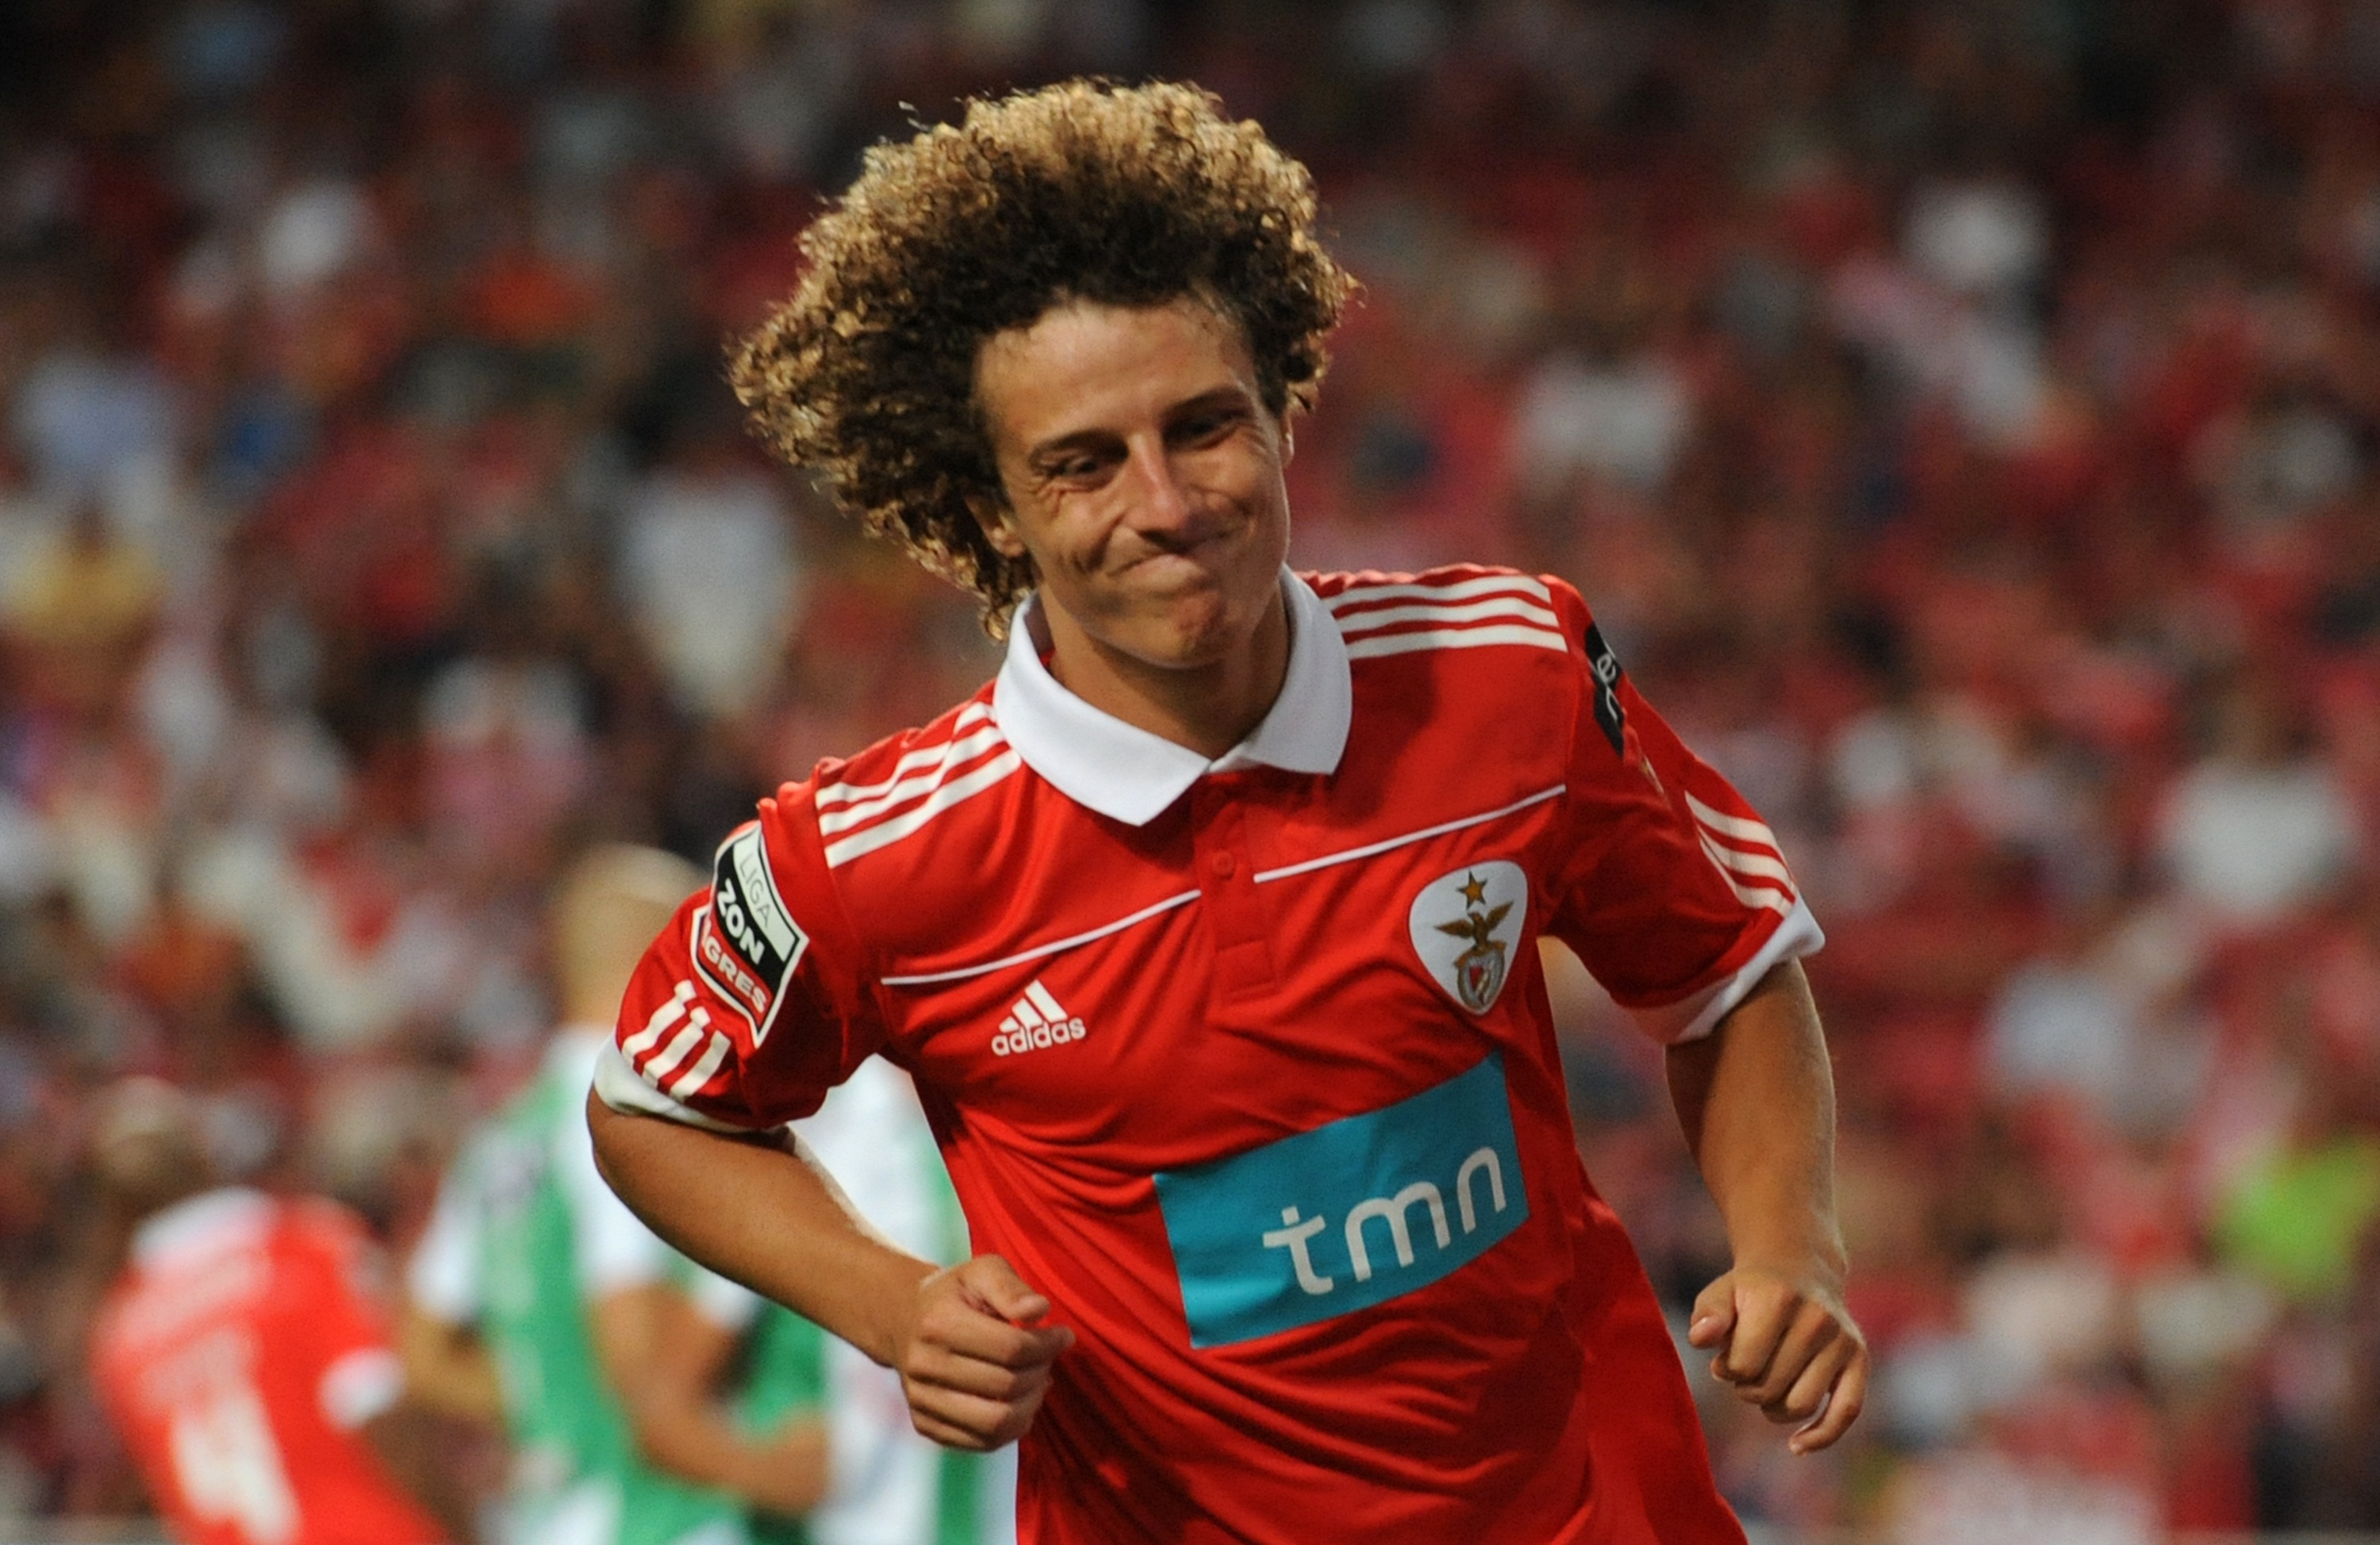 LISBON, PORTUGAL - AUGUST 28:  David Luiz of Benfica in action during the Portuguese Liga match between Vitoria Setubal and Benfica at Luz Stadium on August 28, 2010 in Lisbon, Portugal.  (Photo by Patricia de Melo/EuroFootball/Getty Images)